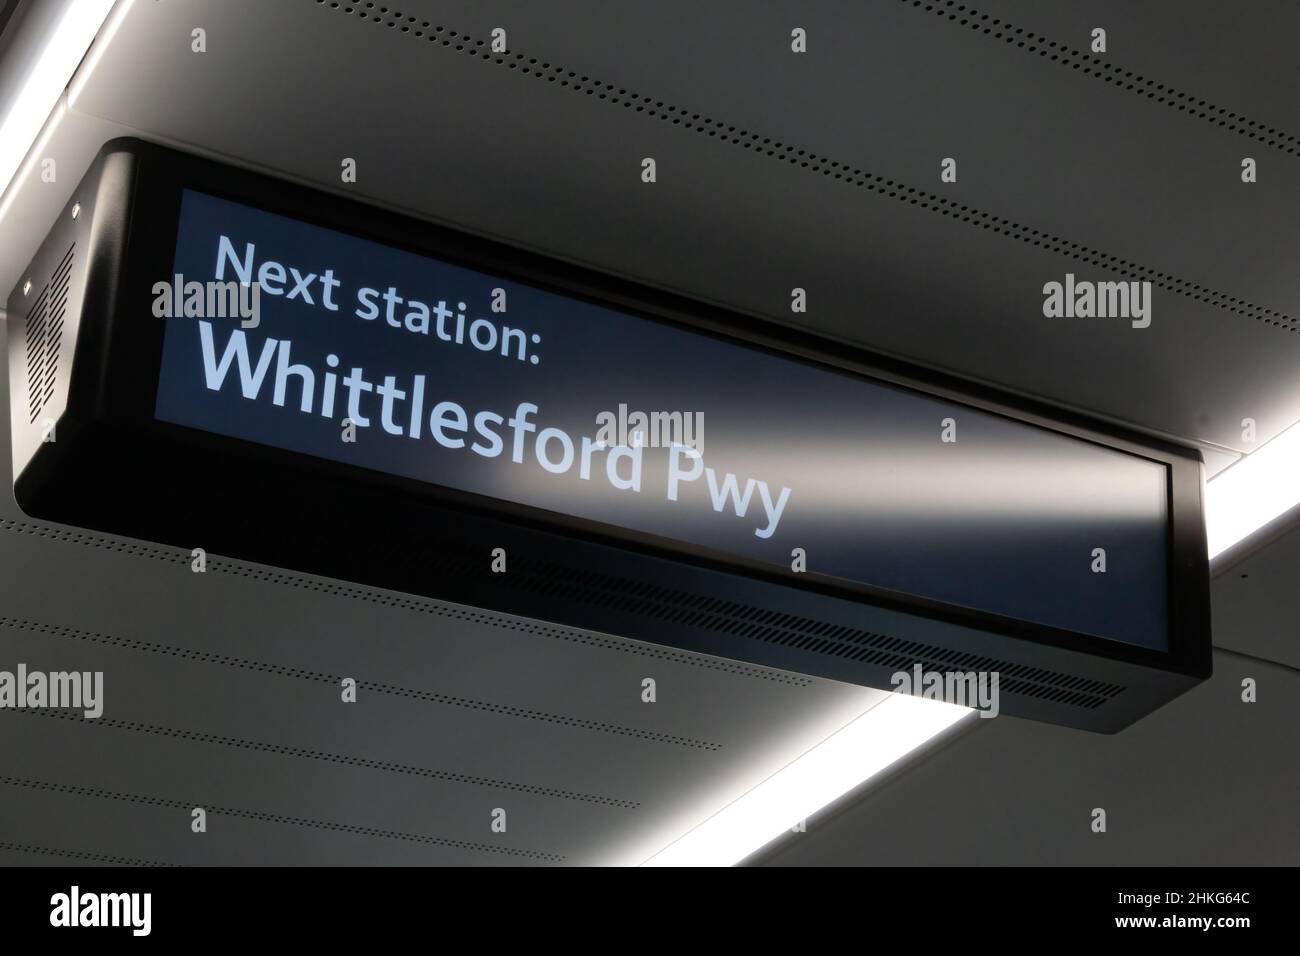 An information sign suspended from the ceiling of a train informs that the next station is Whittlesford Parkway. Stock Photo